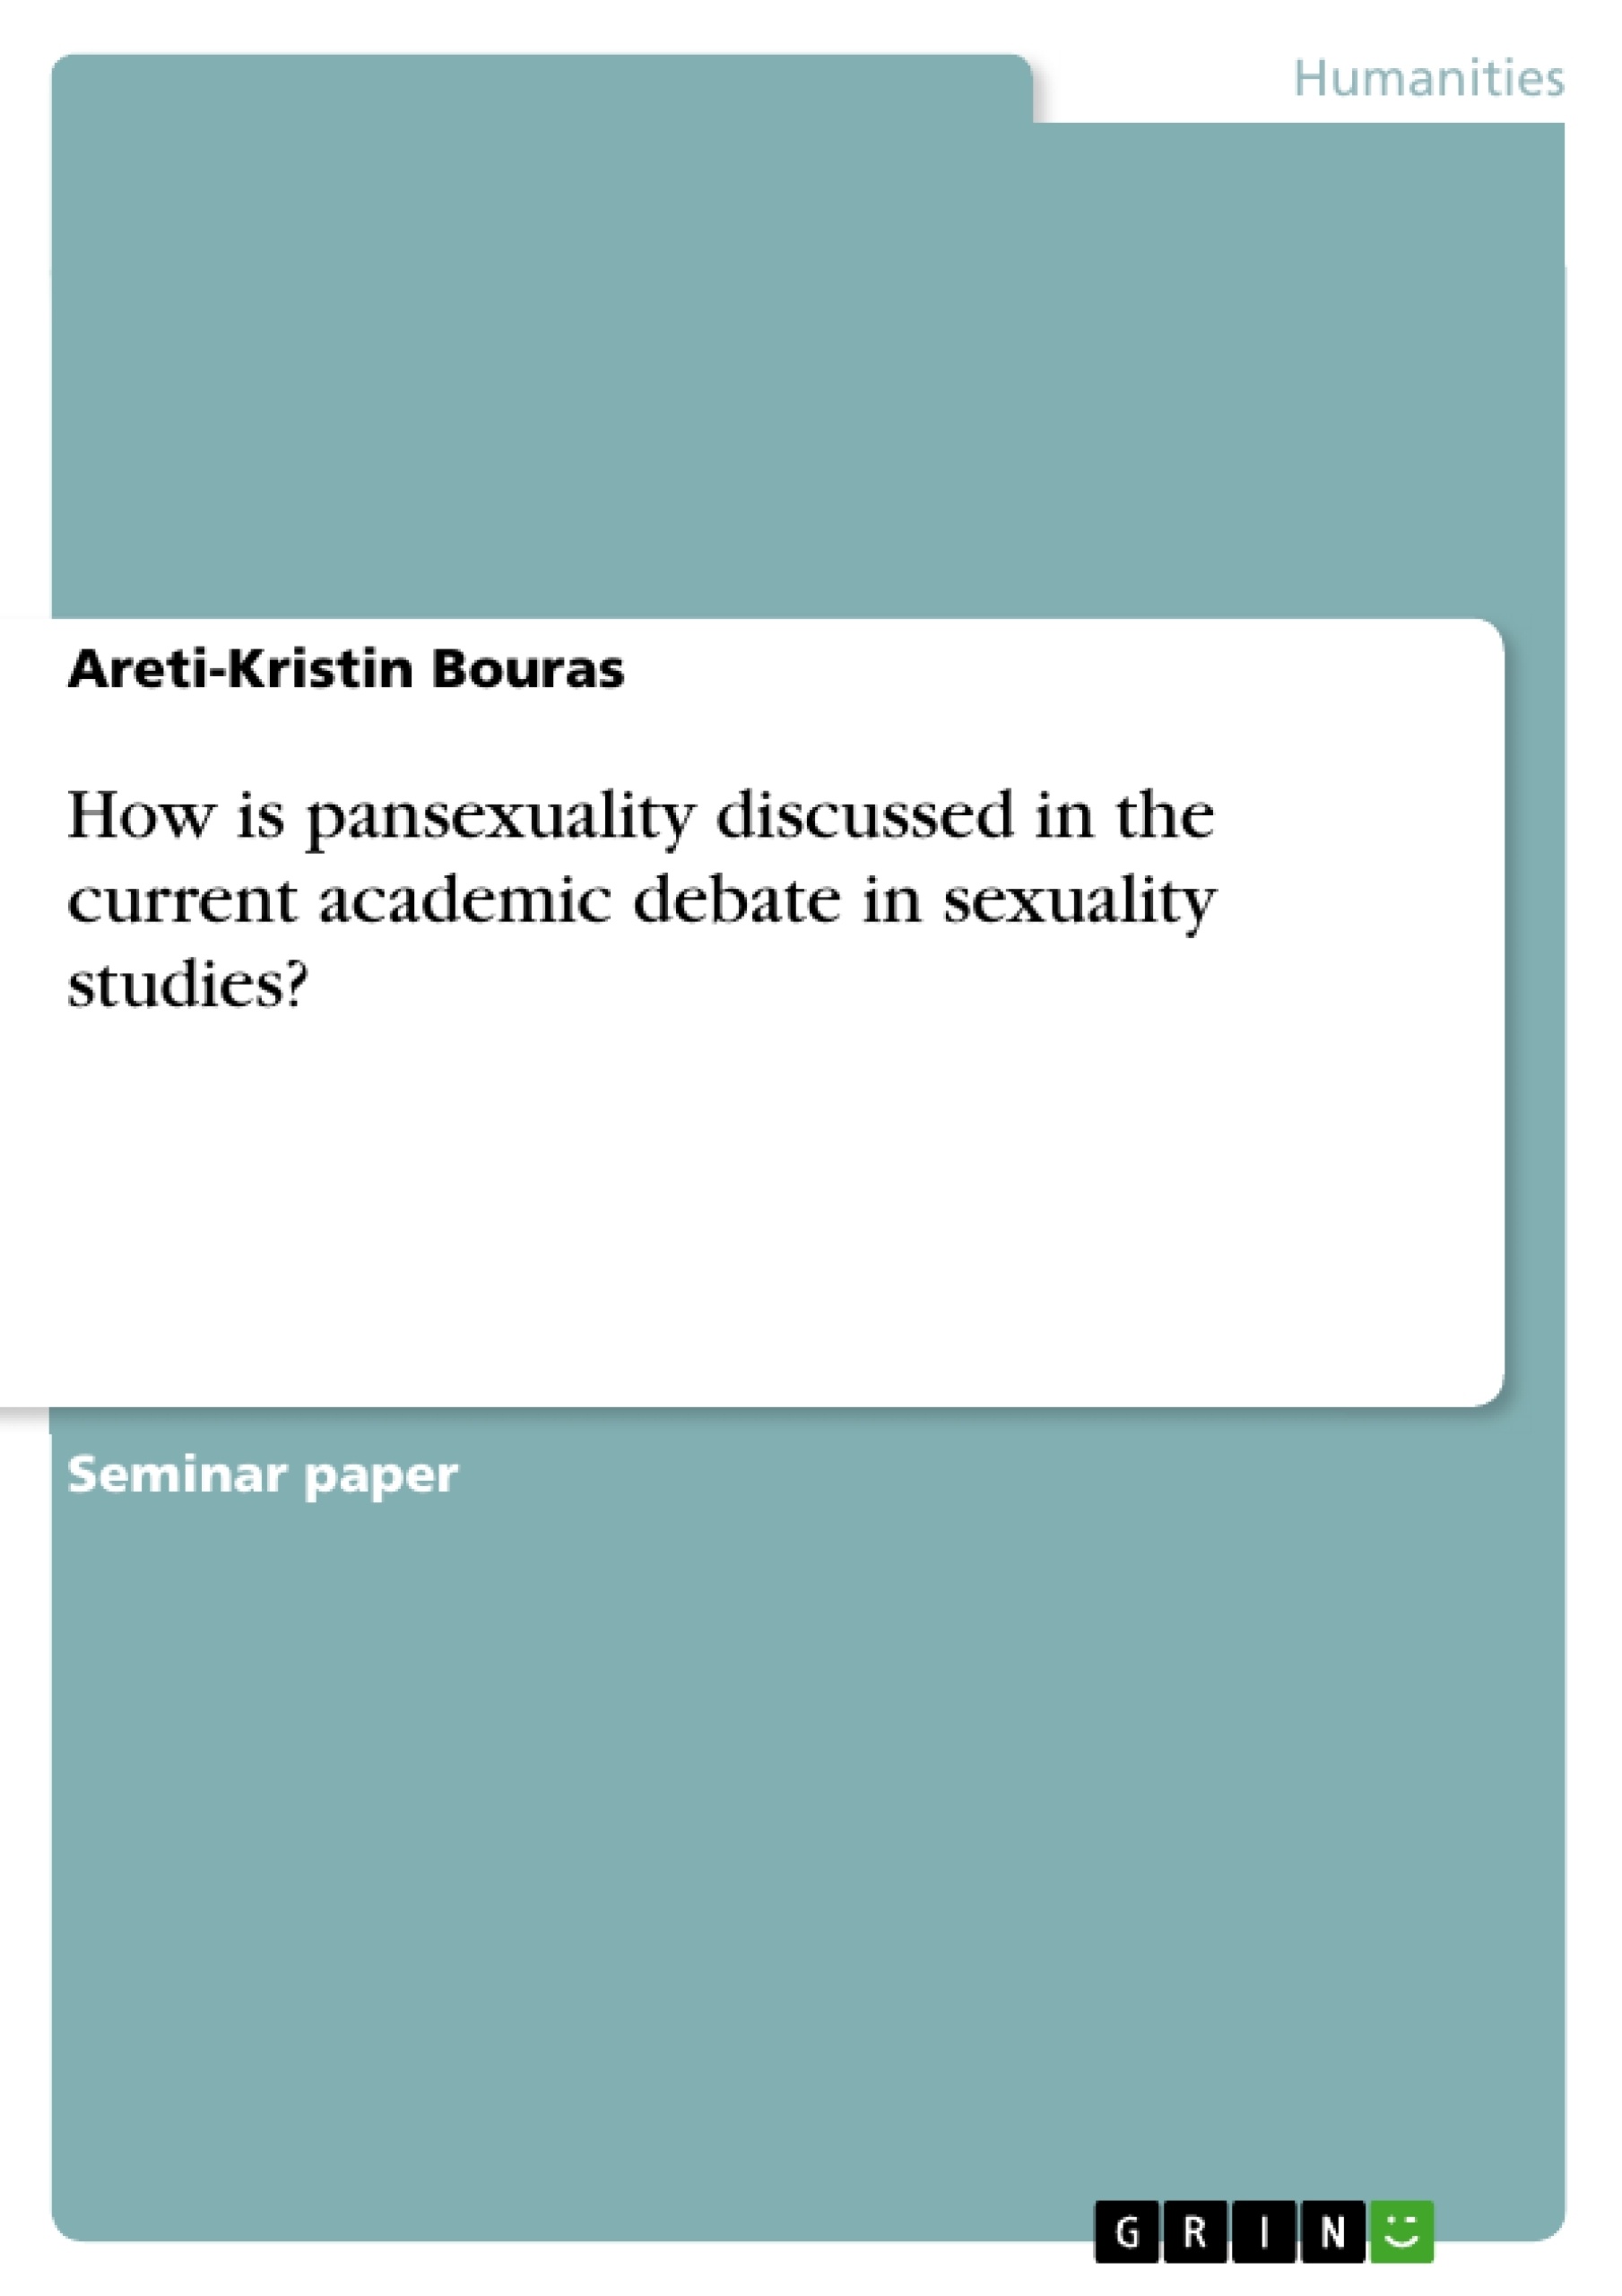 Title: How is pansexuality discussed in the current academic debate in sexuality studies?